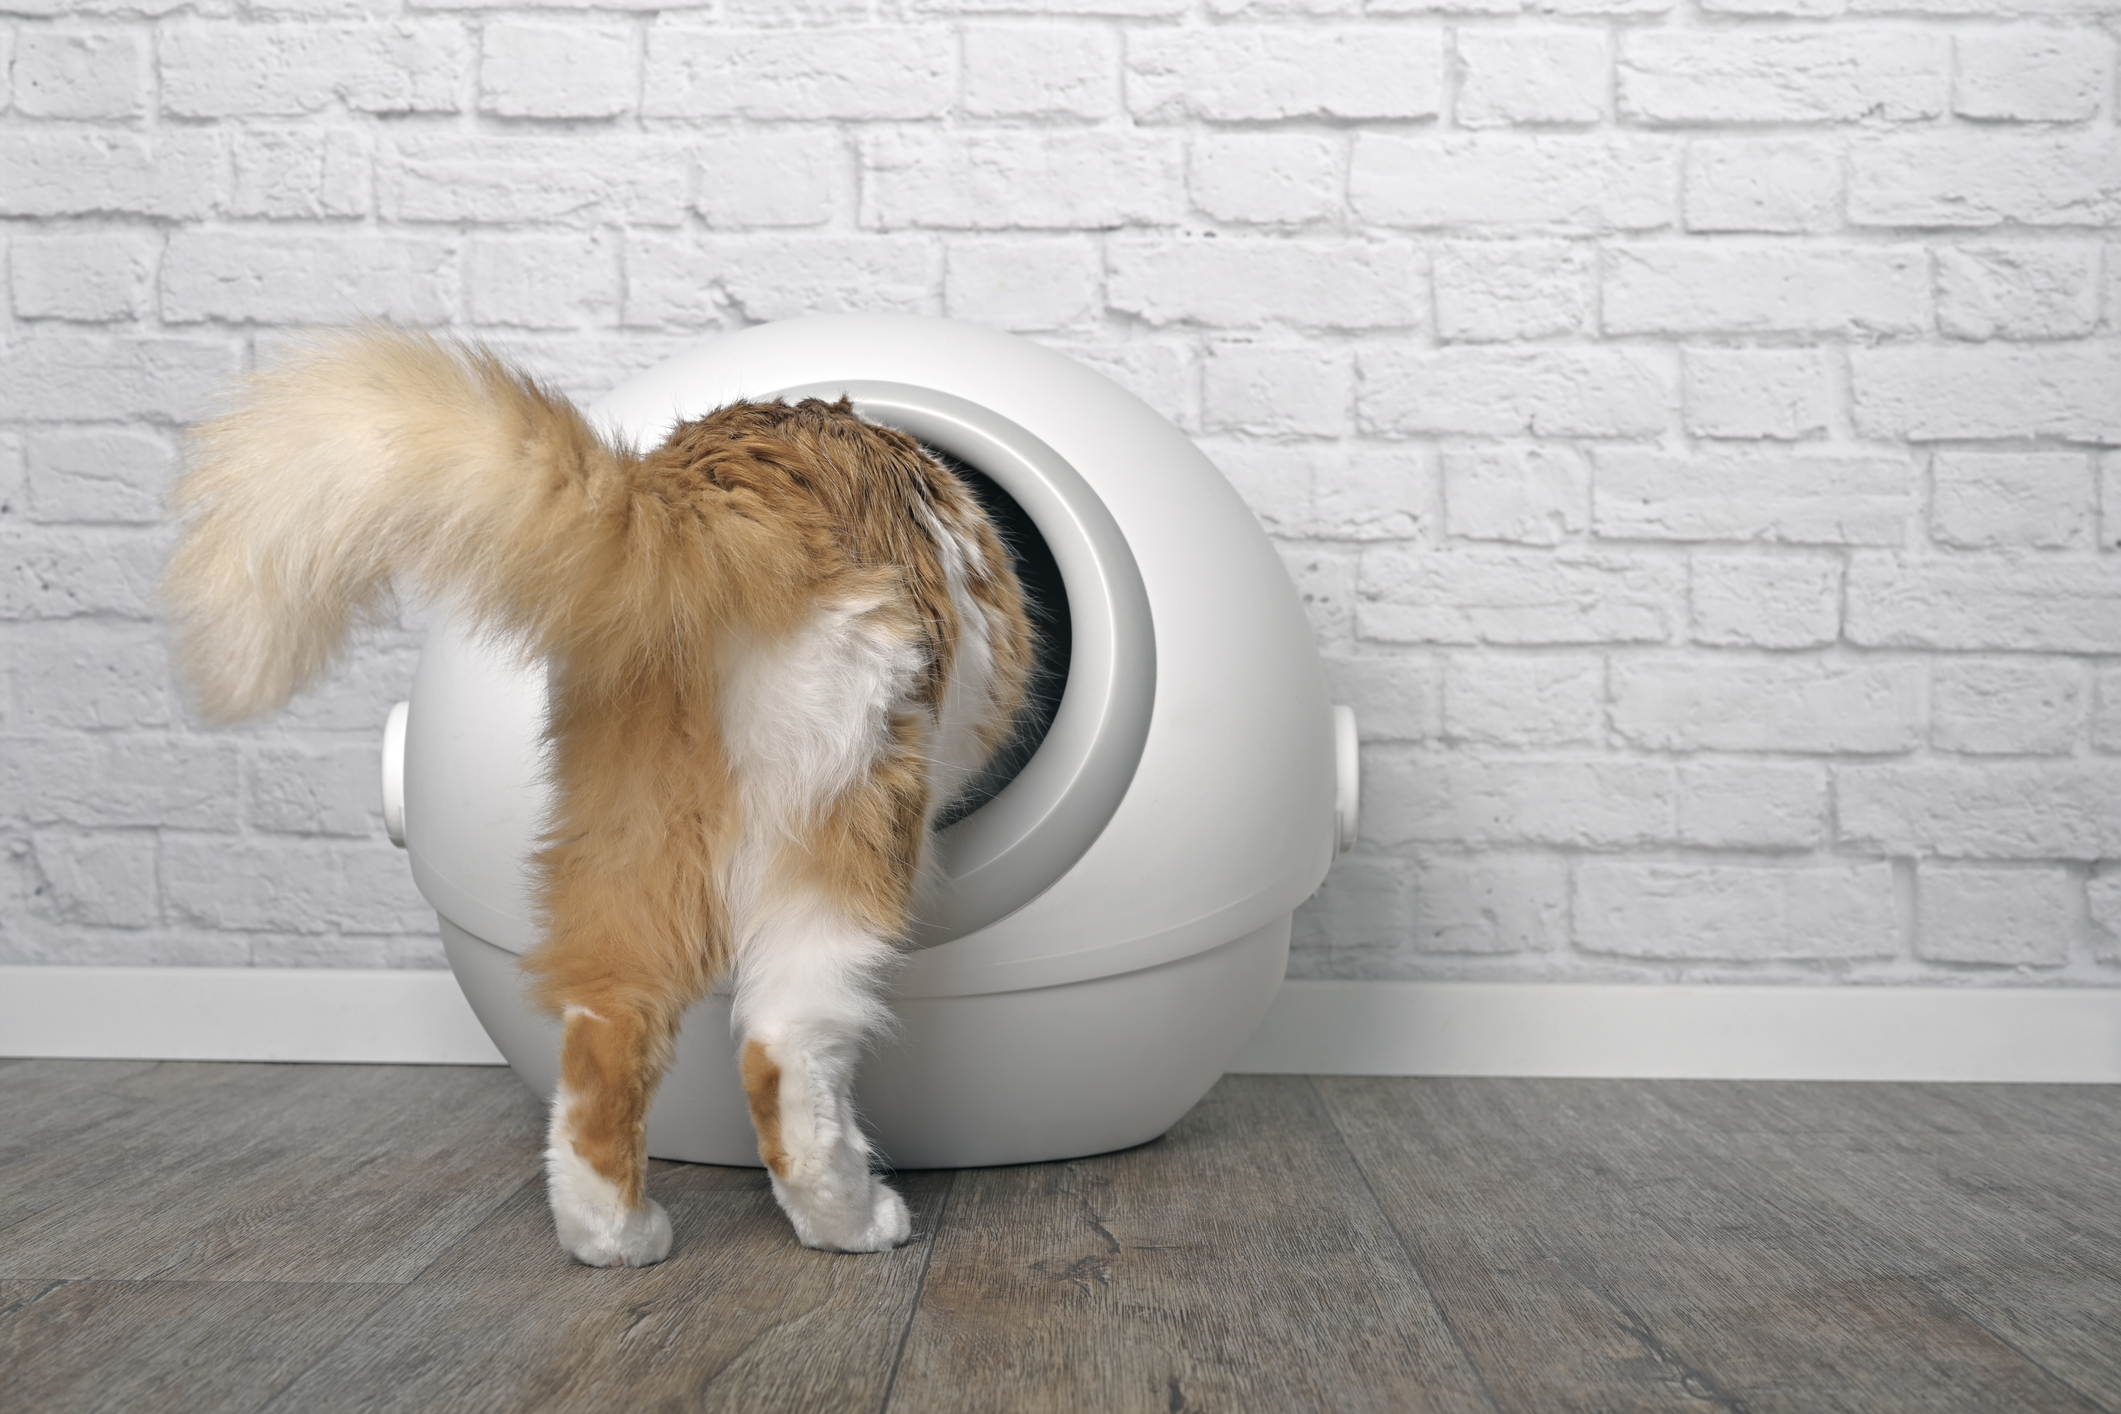 Cat entering a spherical white litter box against a brick wall background